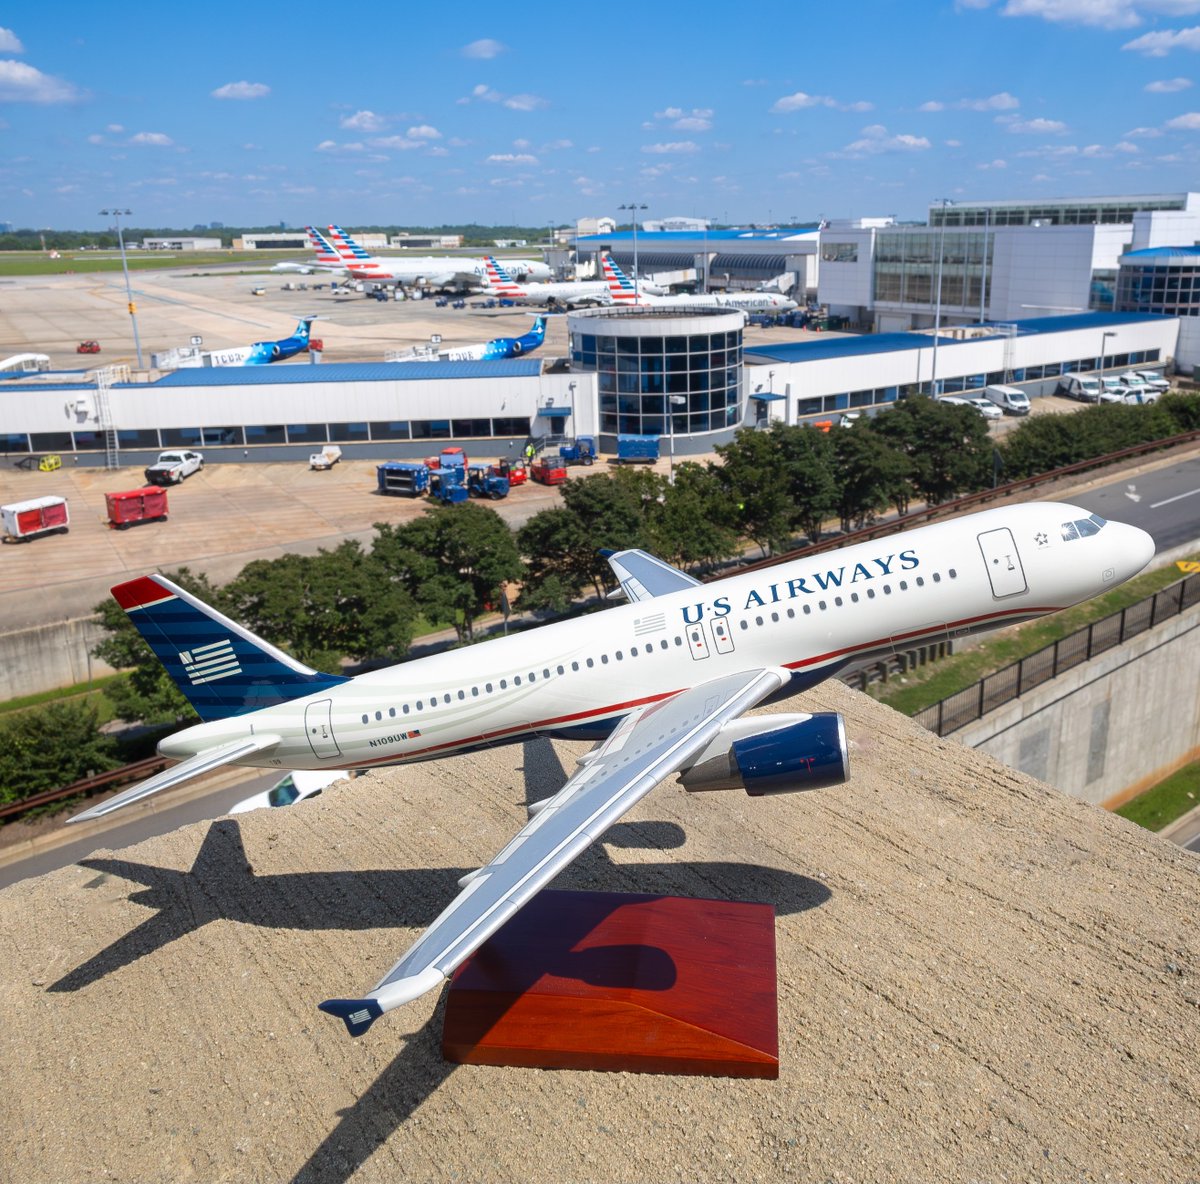 To kick off the start of summer travel season, #CLTairport is giving away this model US Airways plane! ✈️ To enter, drop your favorite summer travel tip in the comments below! Winner will be announced Tuesday, May 28! T&Cs apply: bit.ly/3G2sDFg